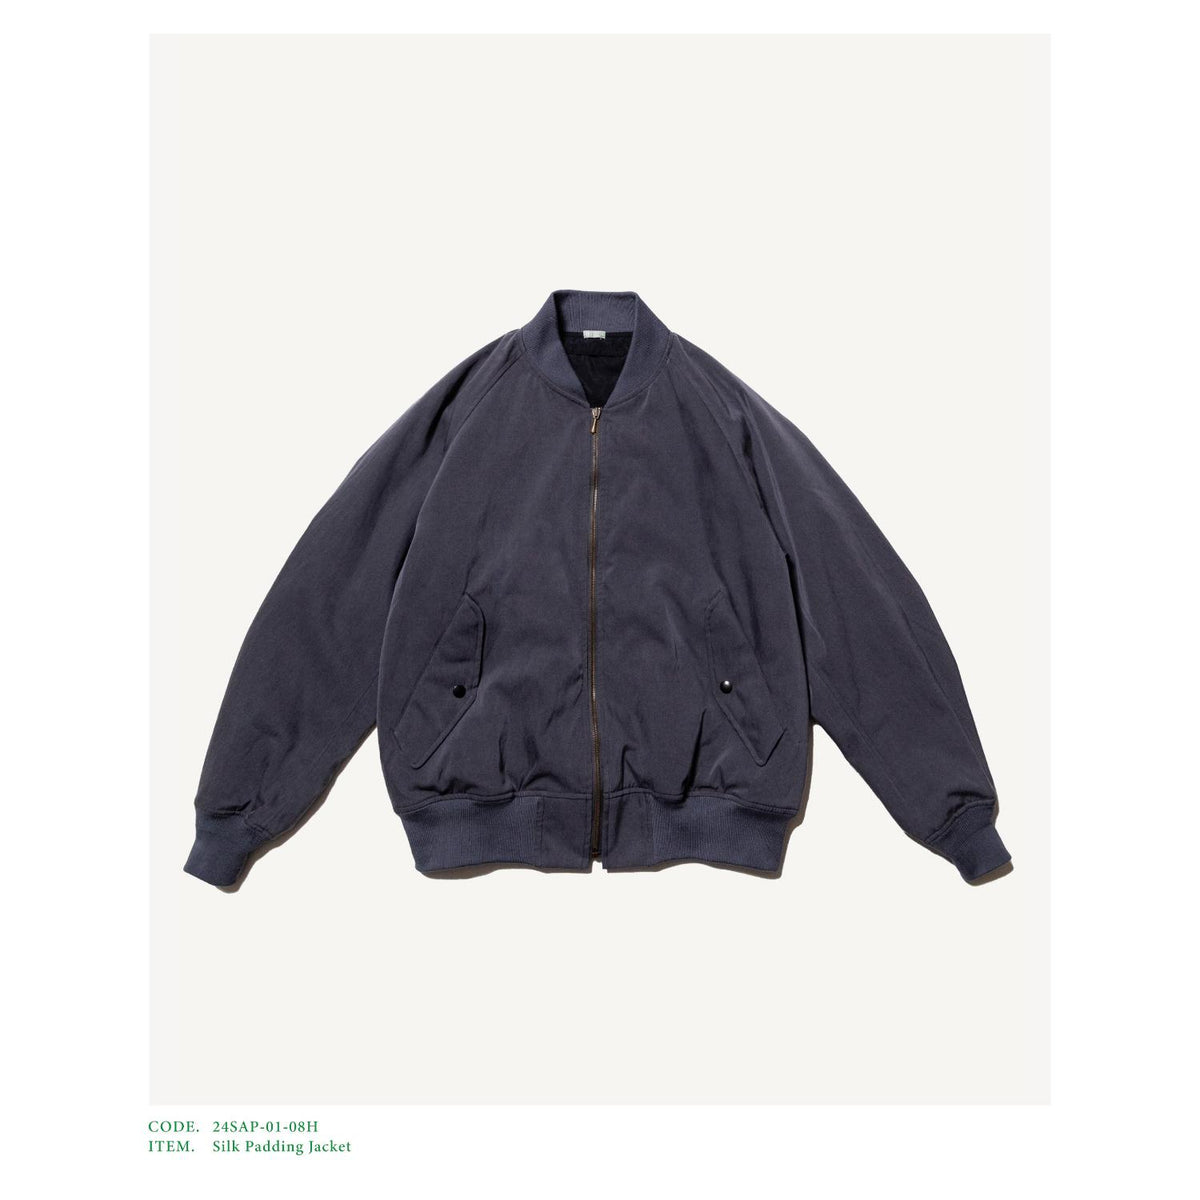 Silk Padding Jacket - A.PRESSE (アプレッセ) - outer (アウター 